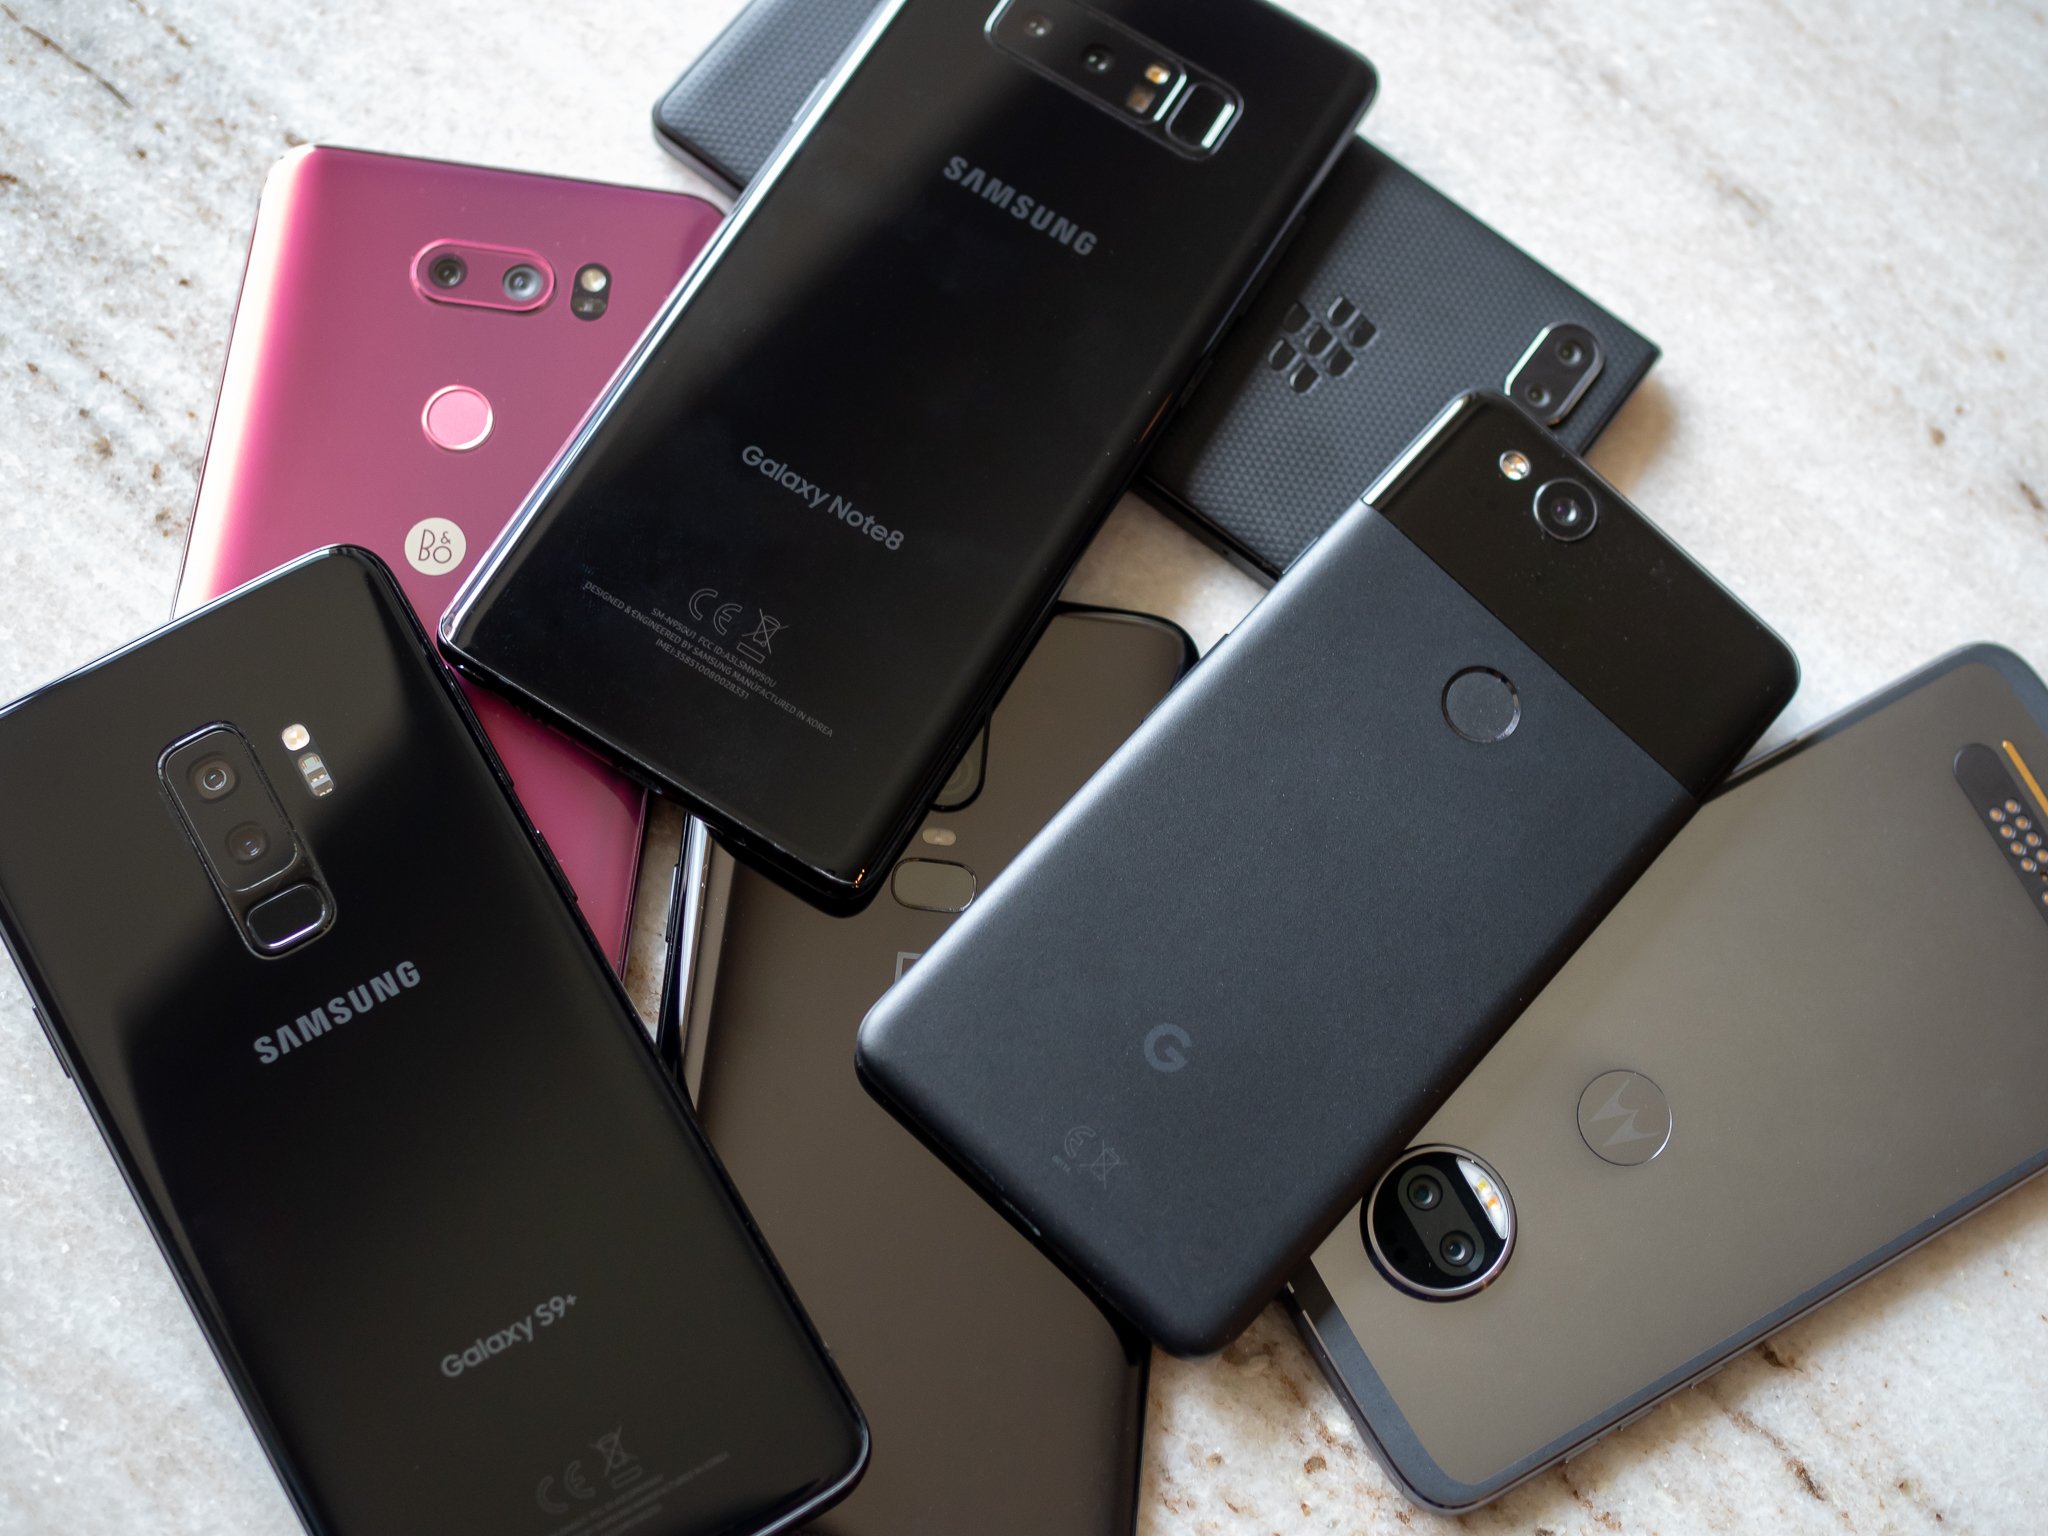 The best place to buy a refurbished Android phone